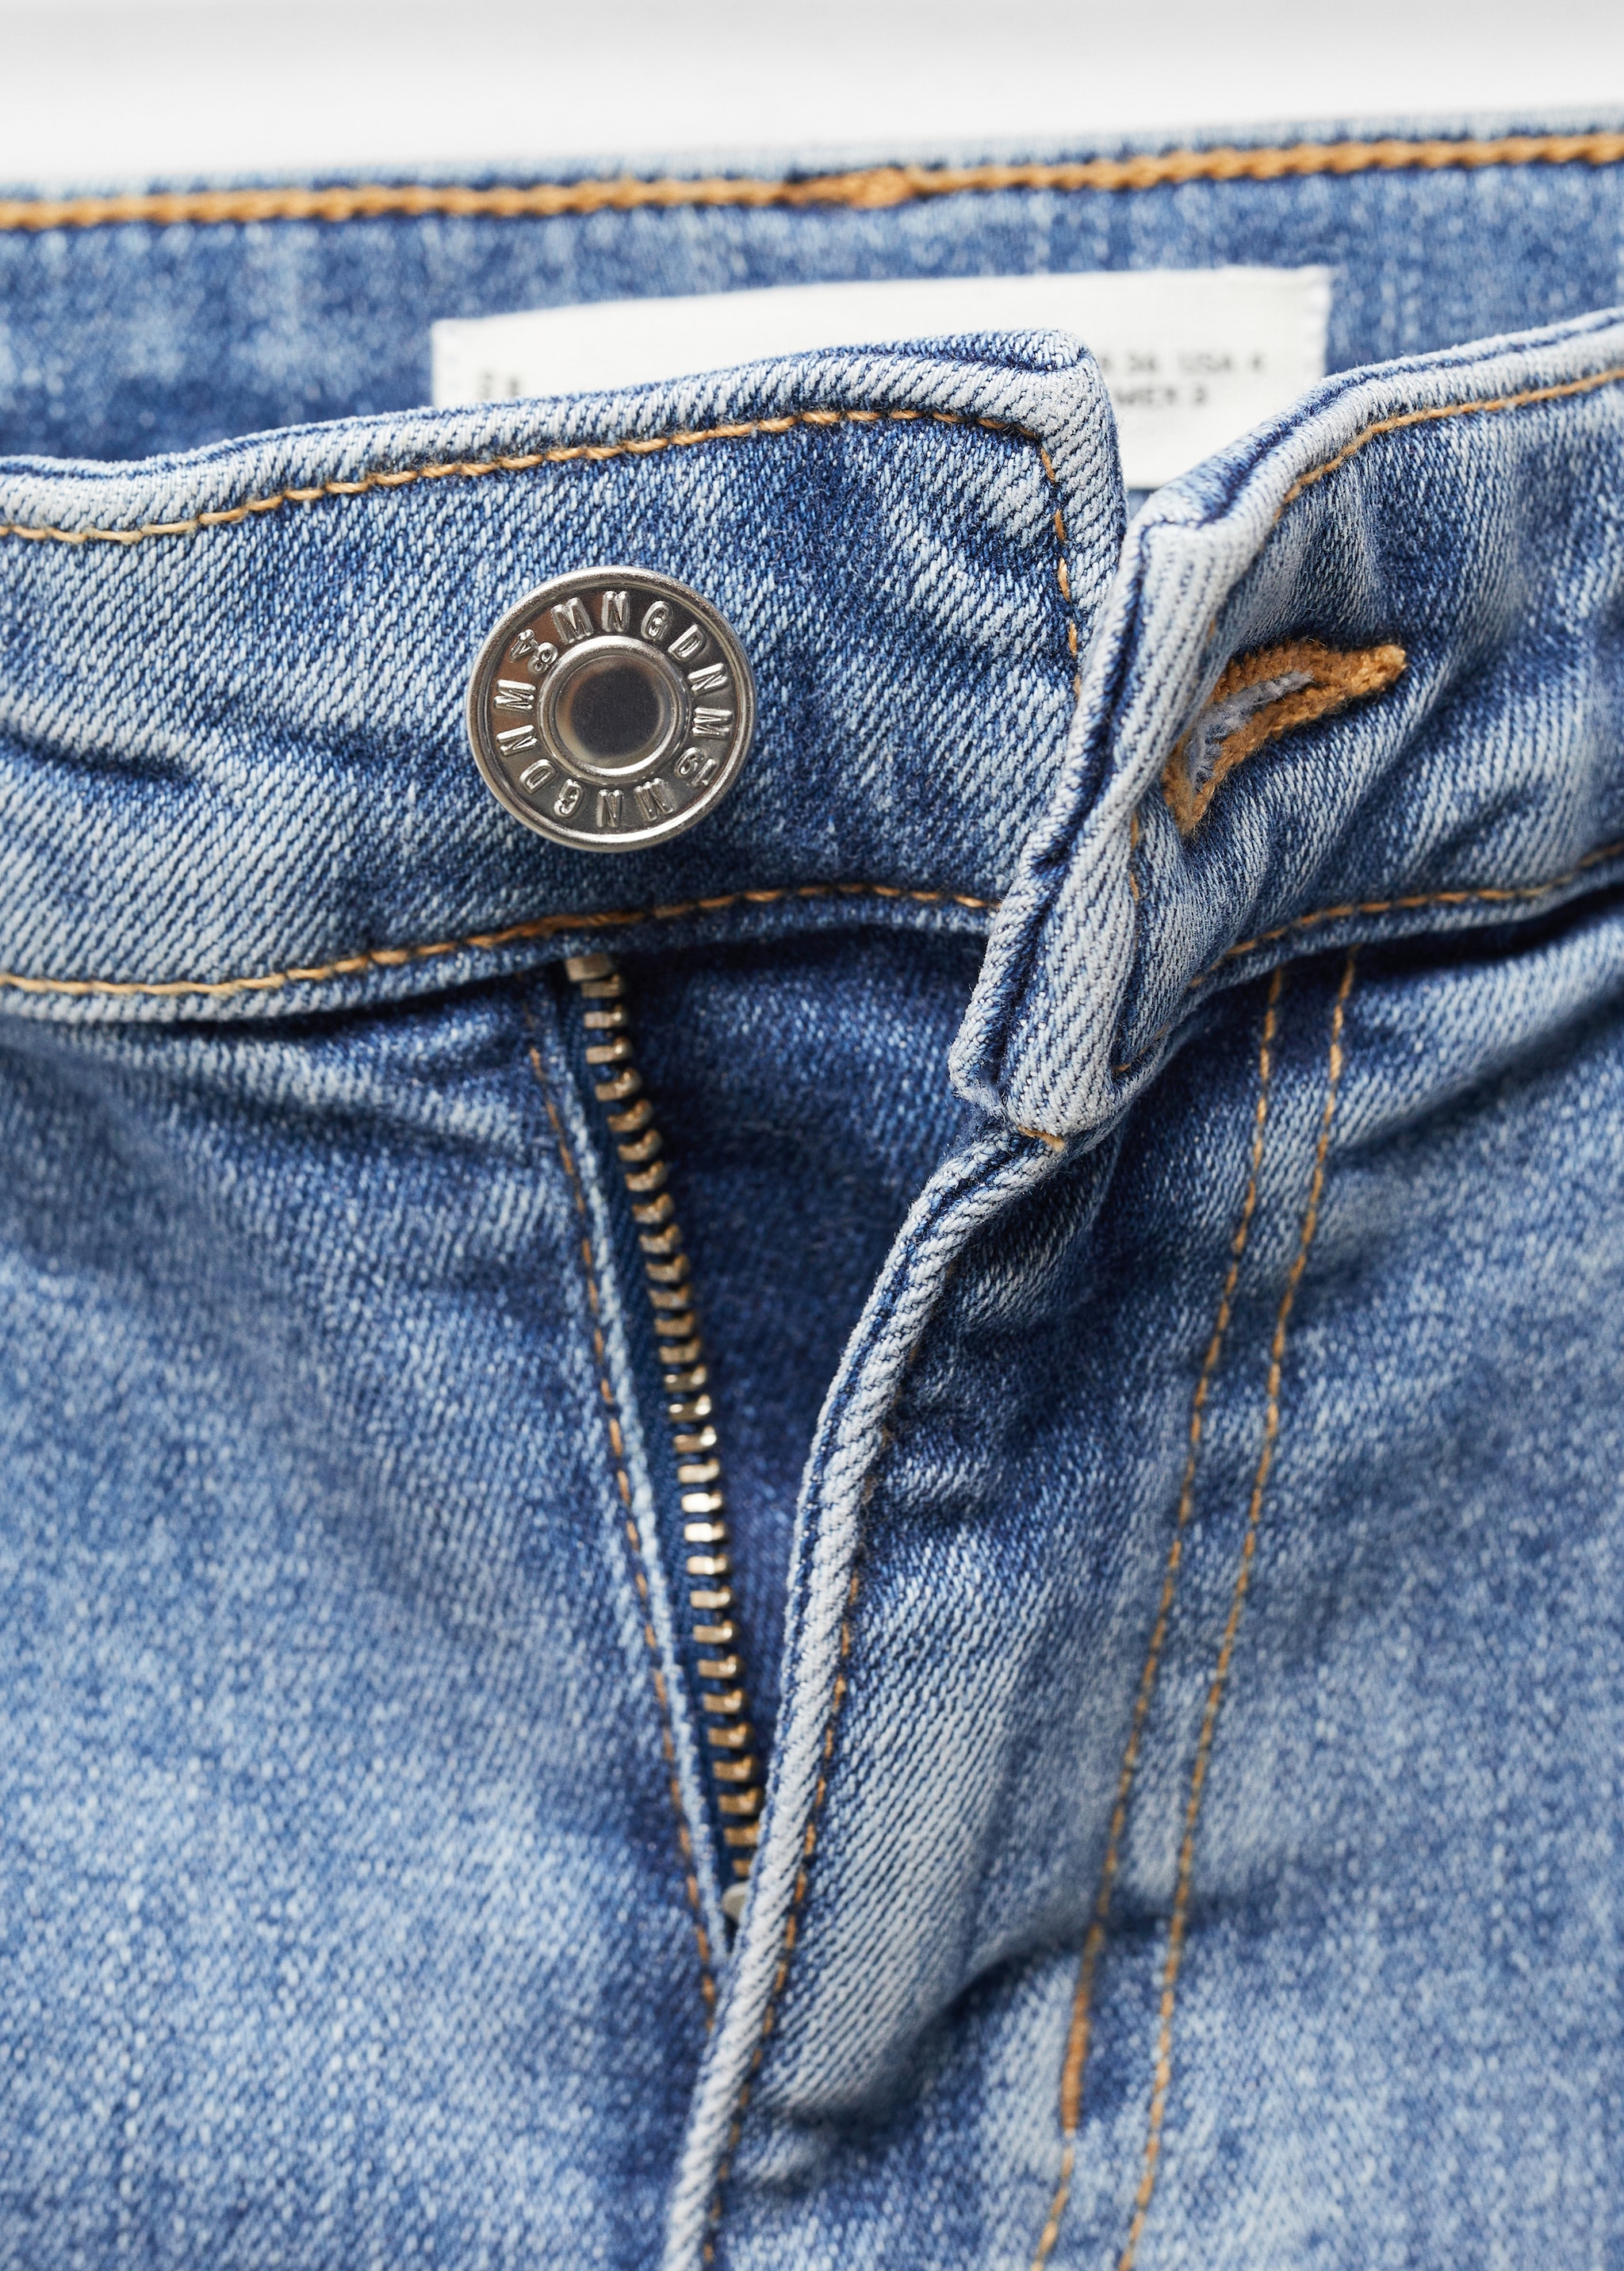 Capri jeans with decorative stitching - Details of the article 8